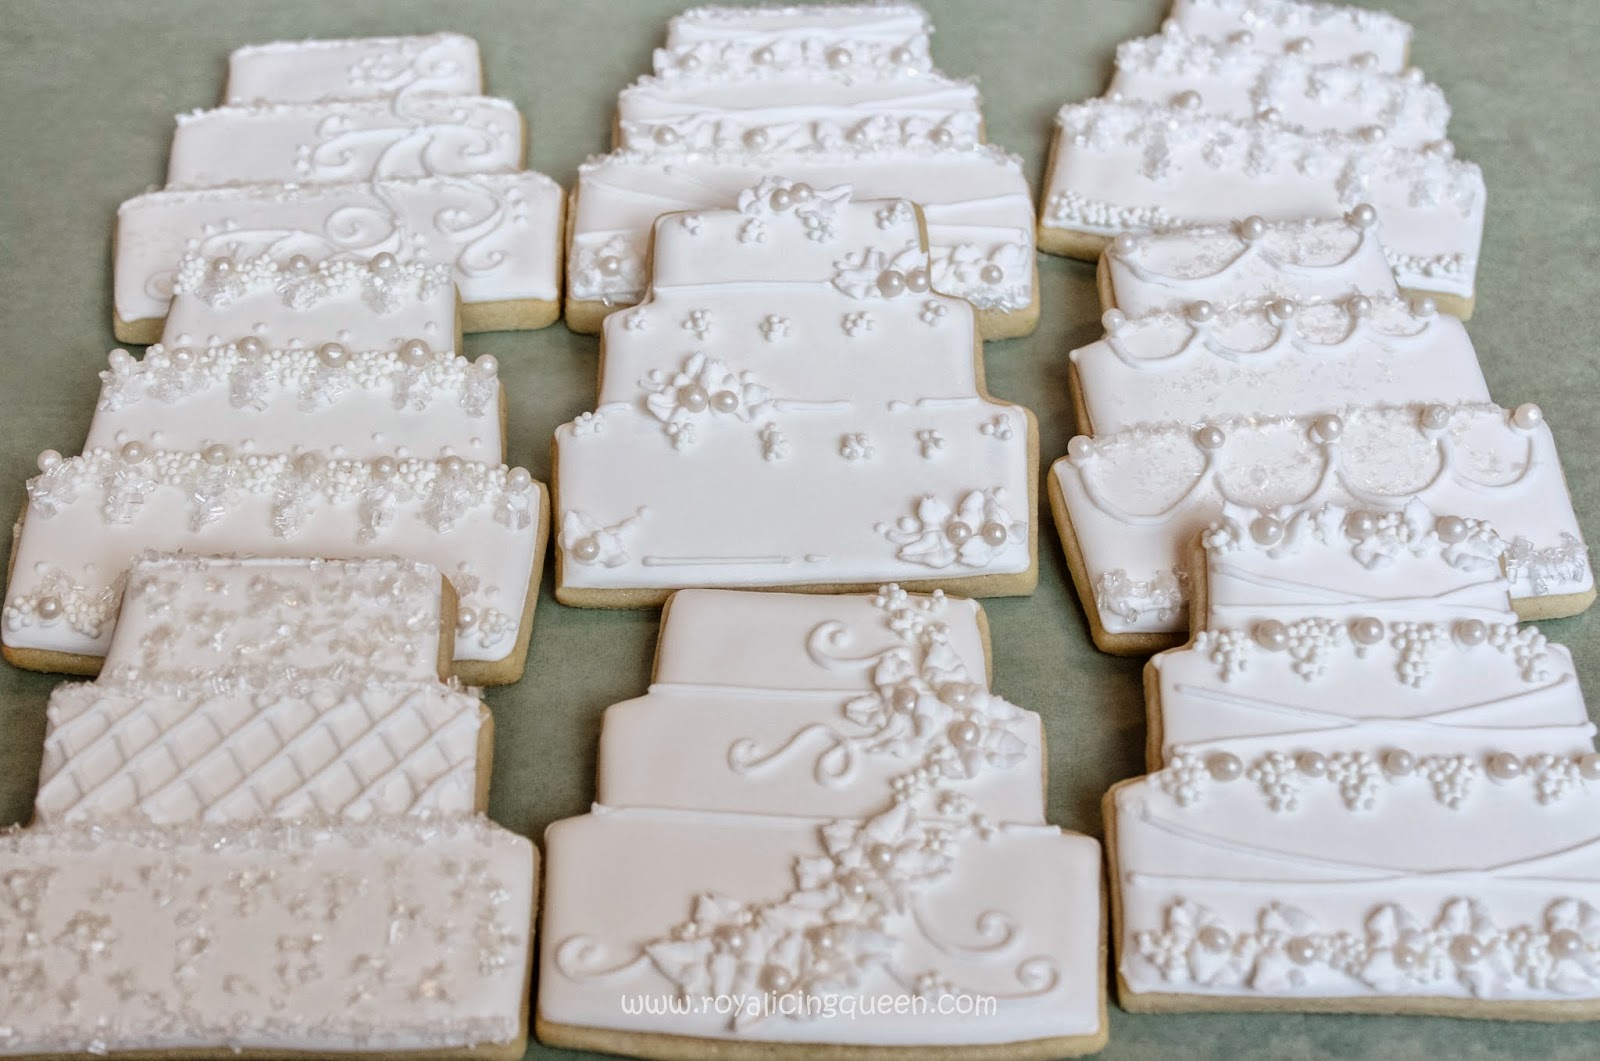 The Royal Icing Queen Wedding  Cake  Cookies 